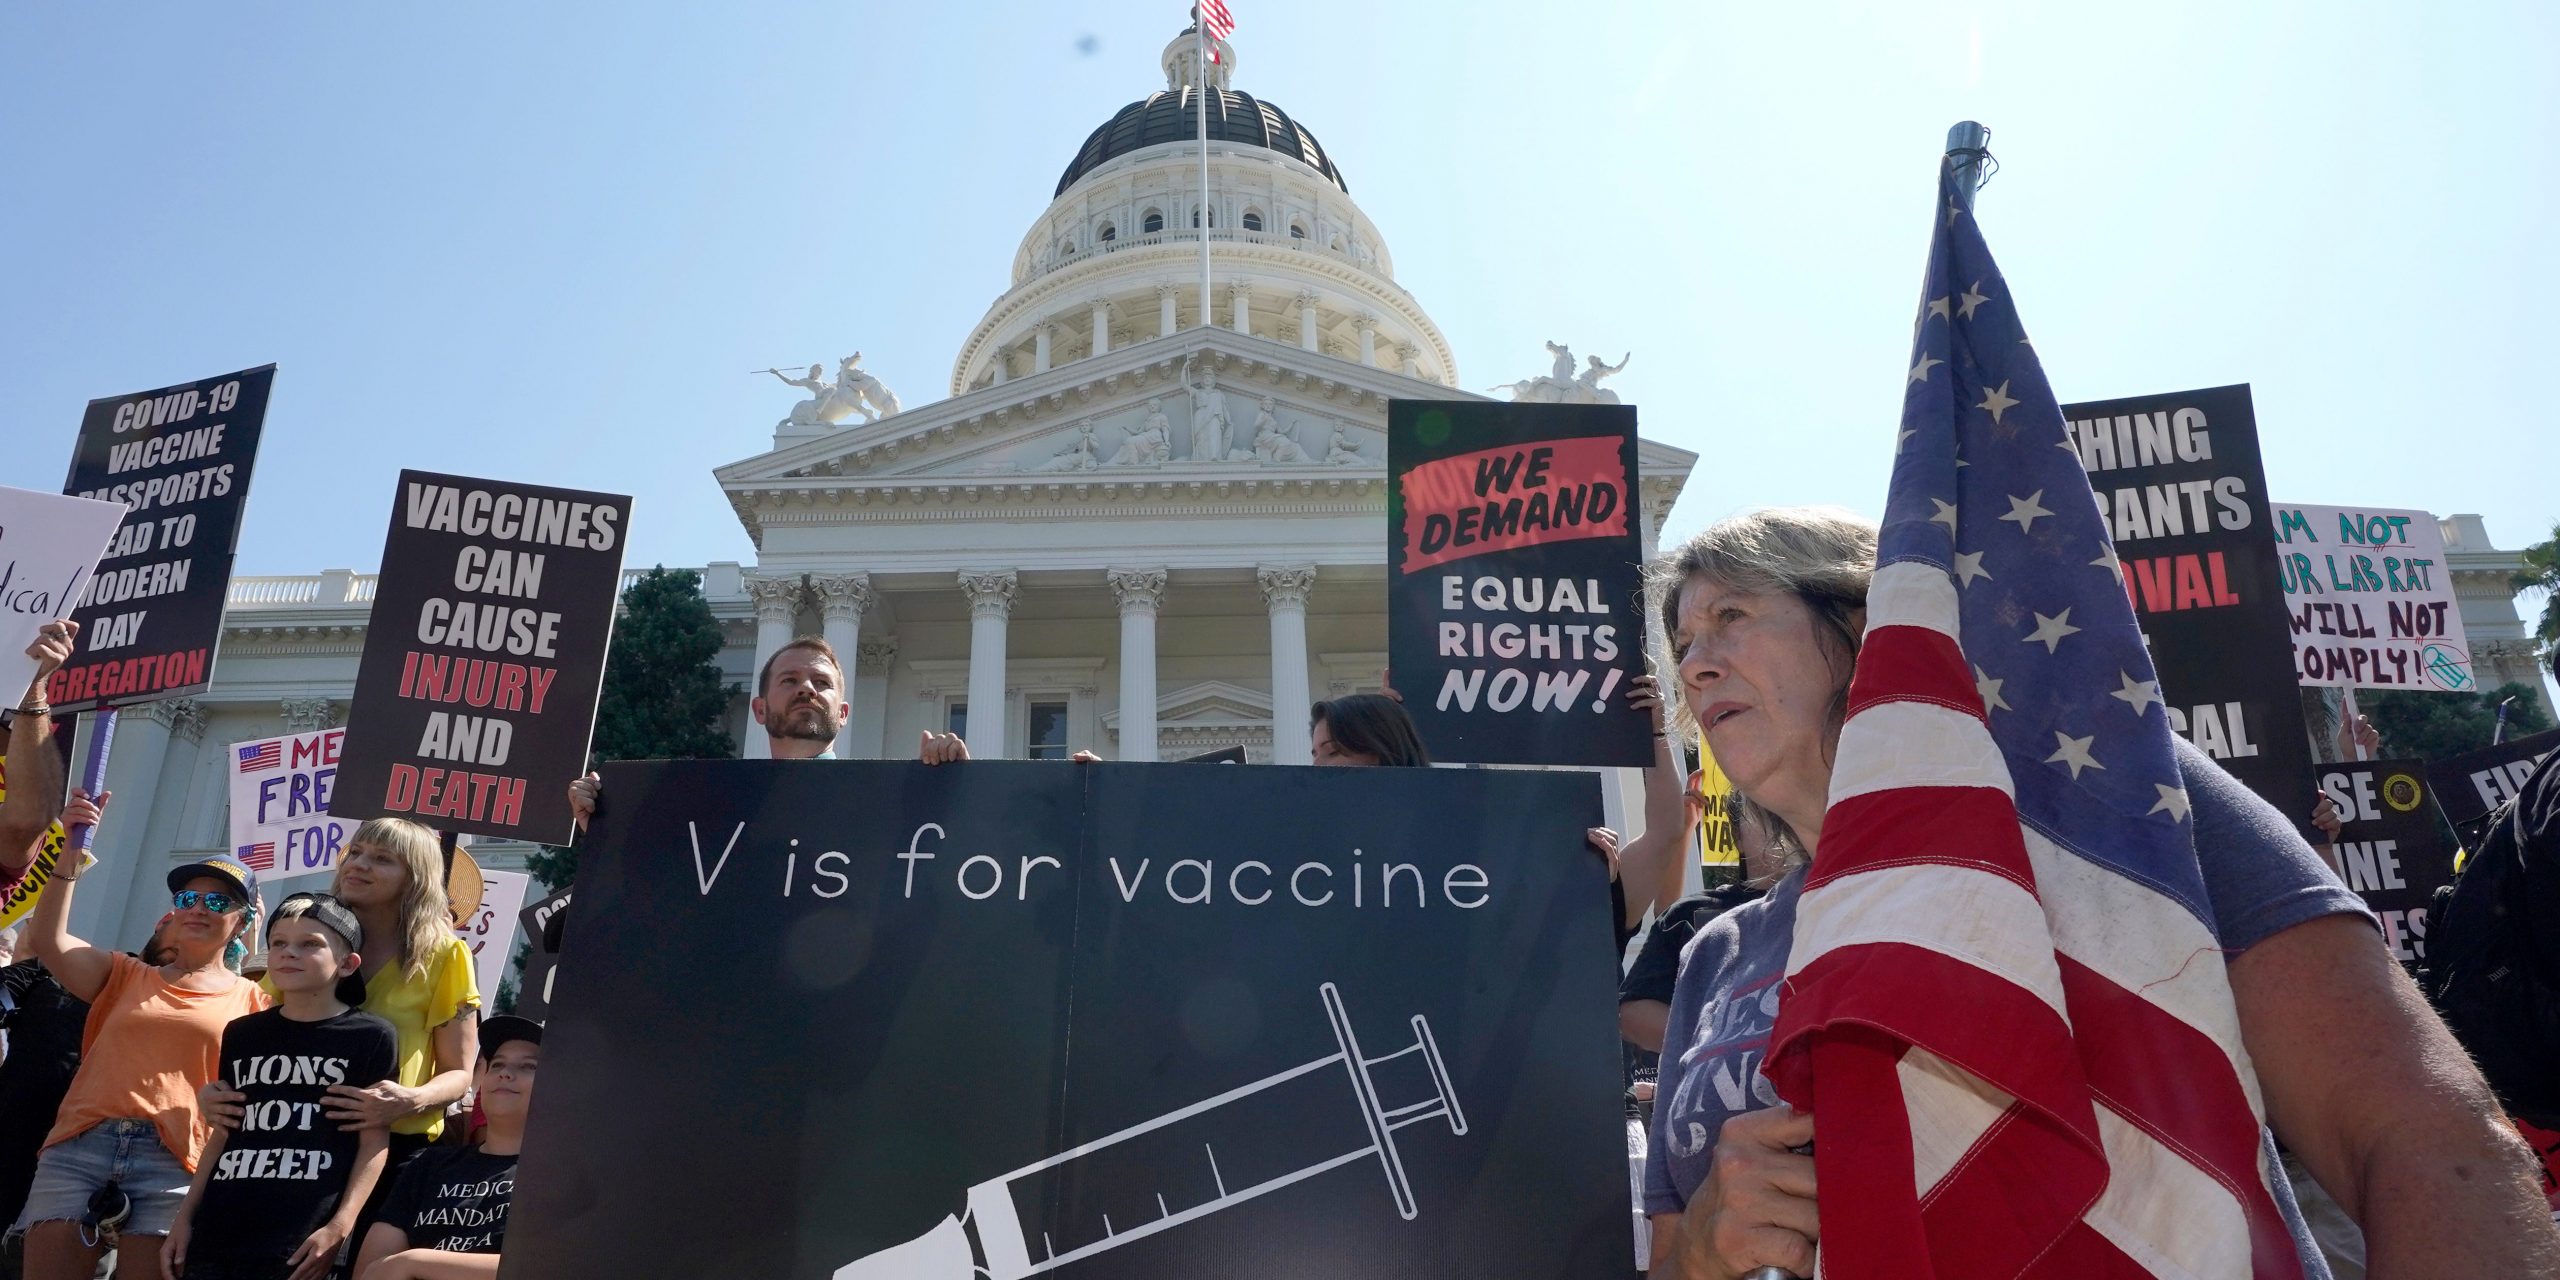 Protesters opposing vaccine mandates gather with signs and flags in front of the Capitol.